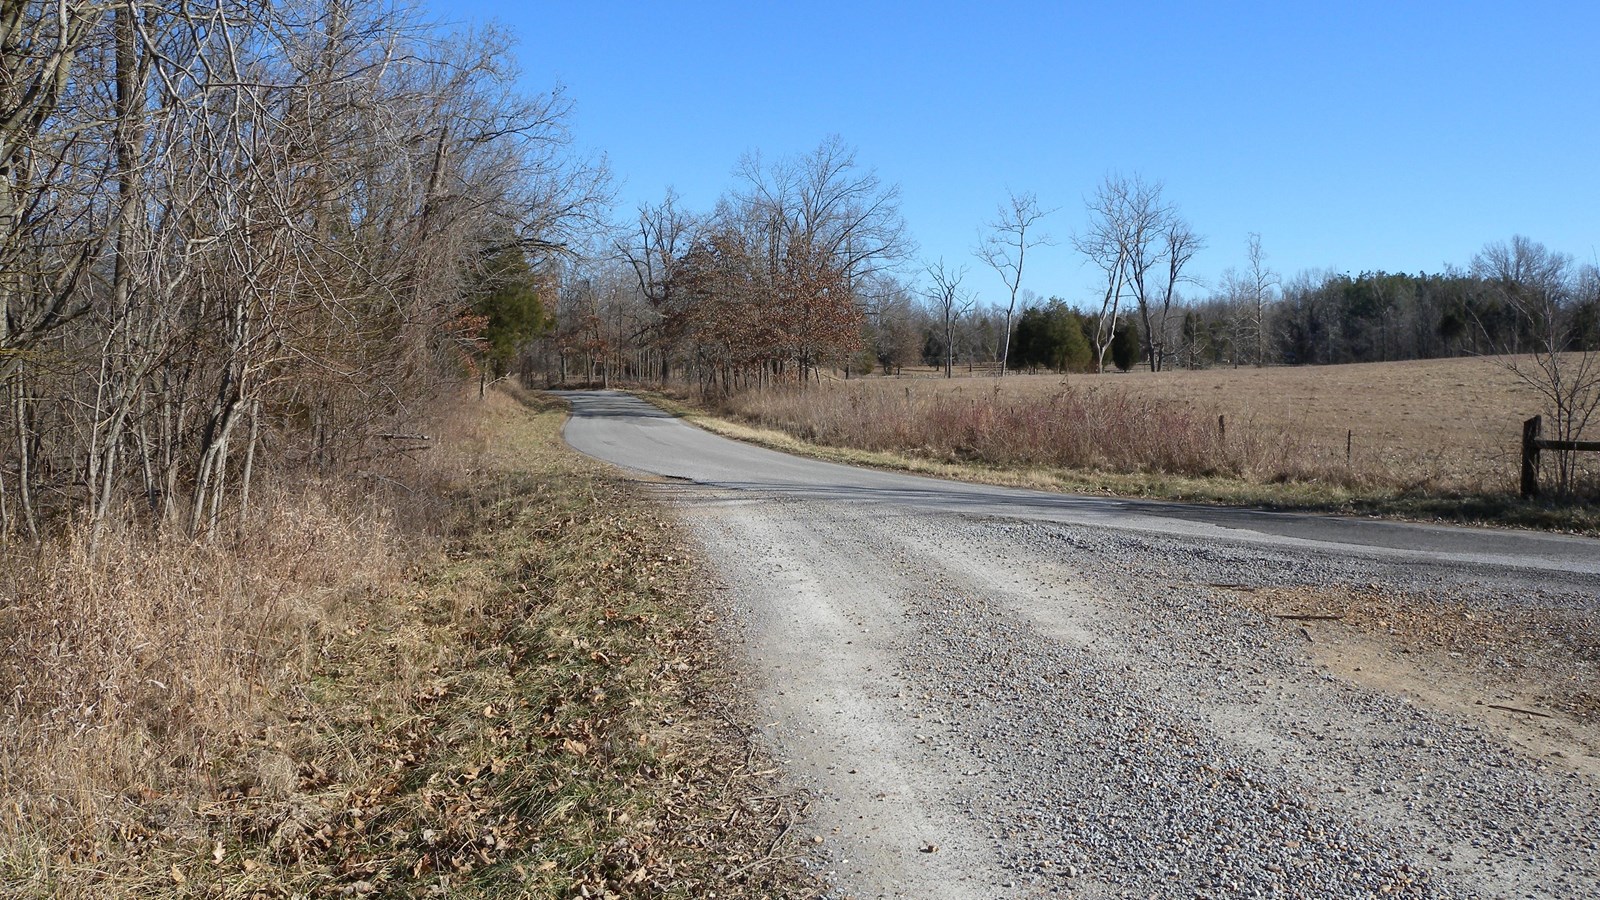 Find the original route of the Trail of Tears through Golconda, Illinois